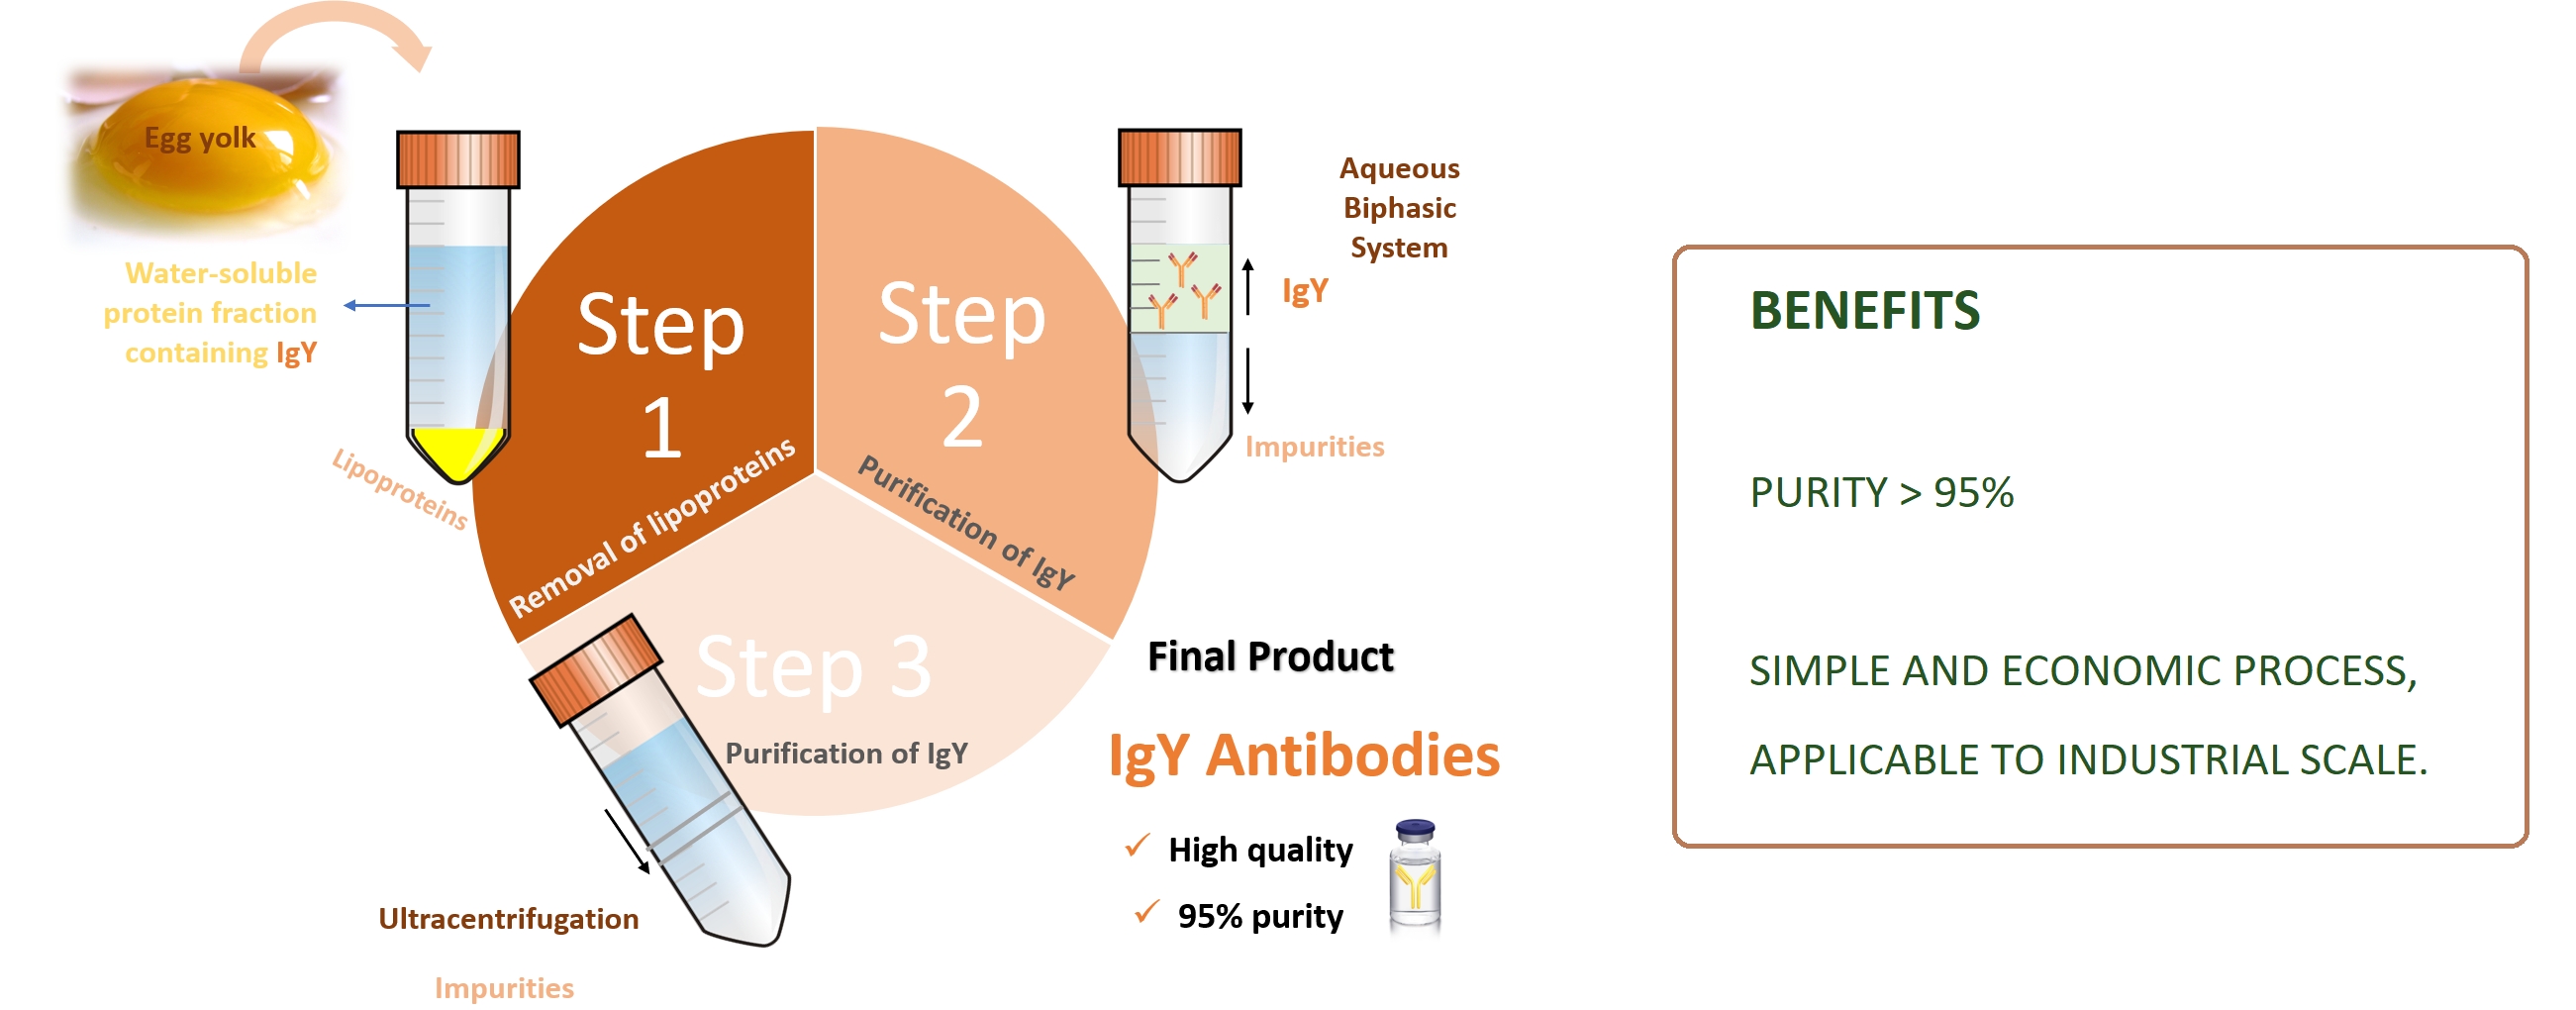 Immunoglobulin Y Purification, Its Products And Uses